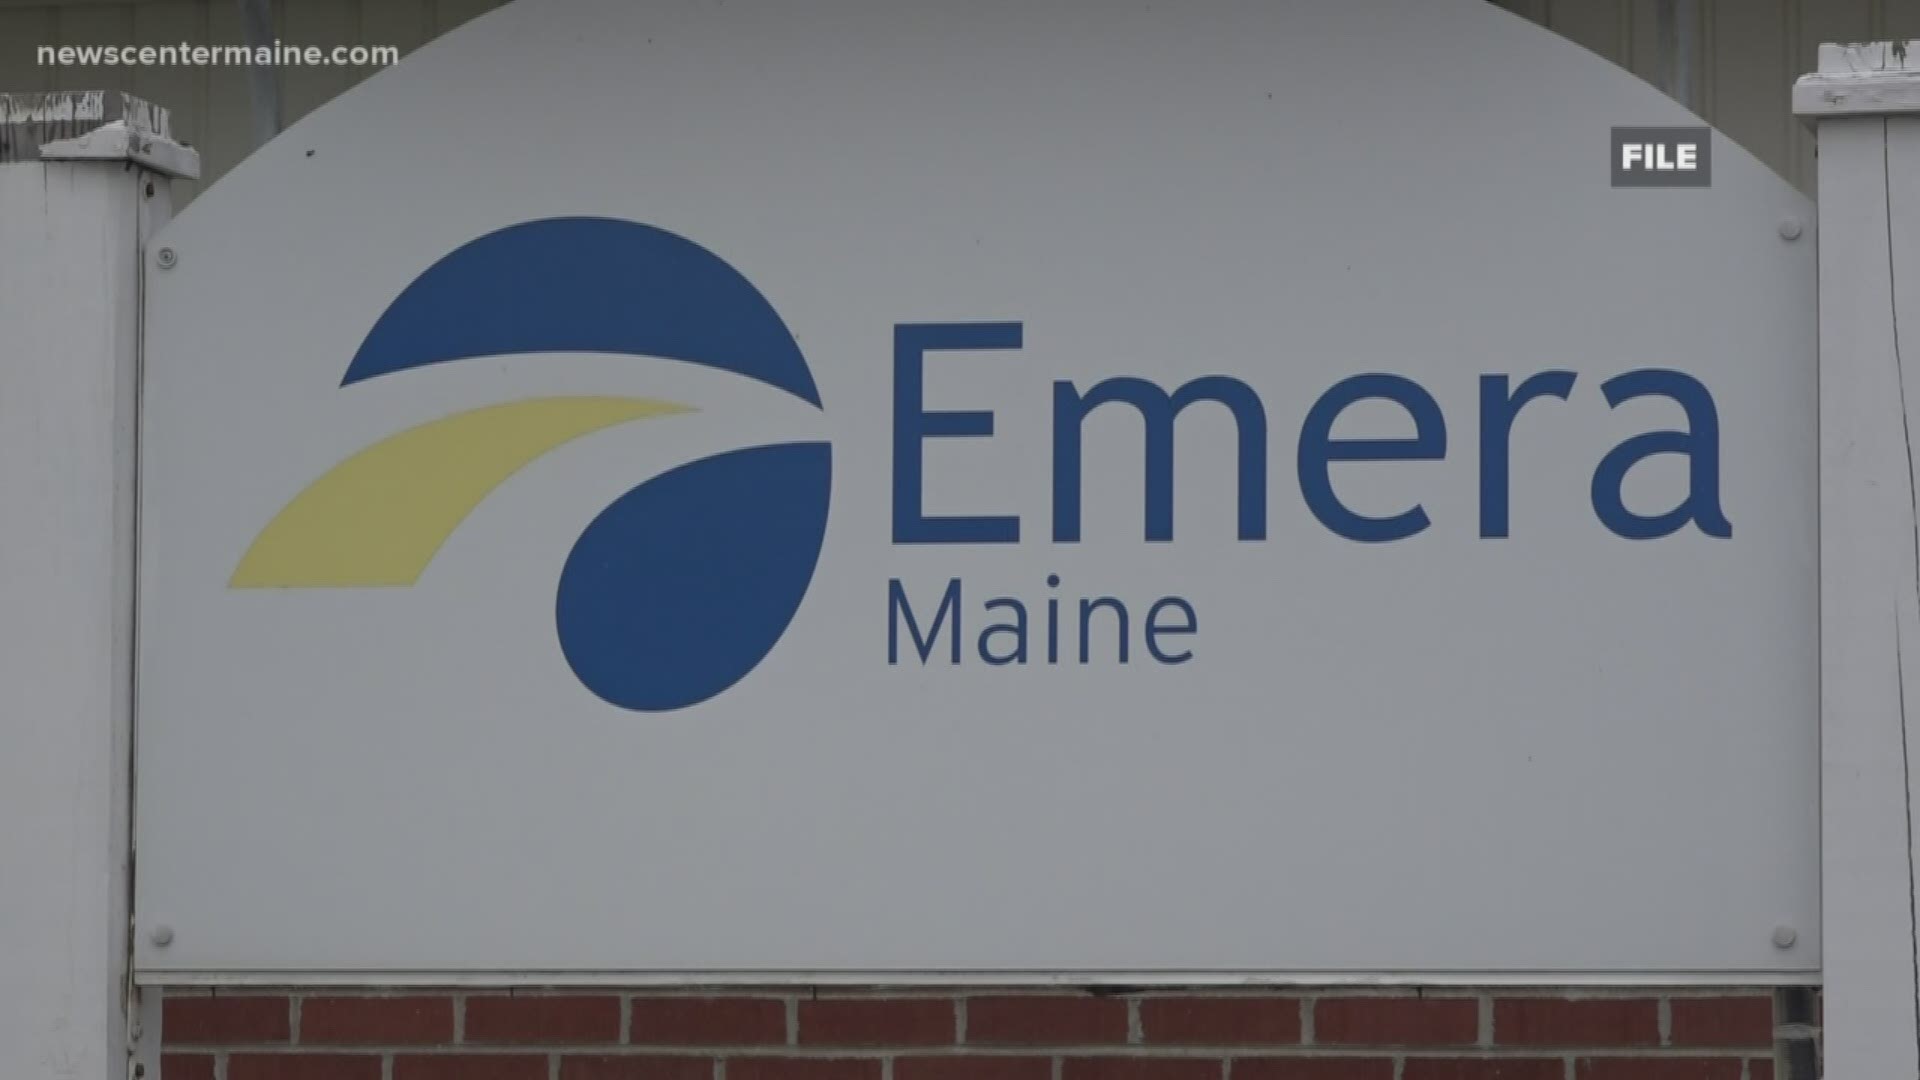 Electricity crews for Emera Maine are getting ready for high winds and rain.